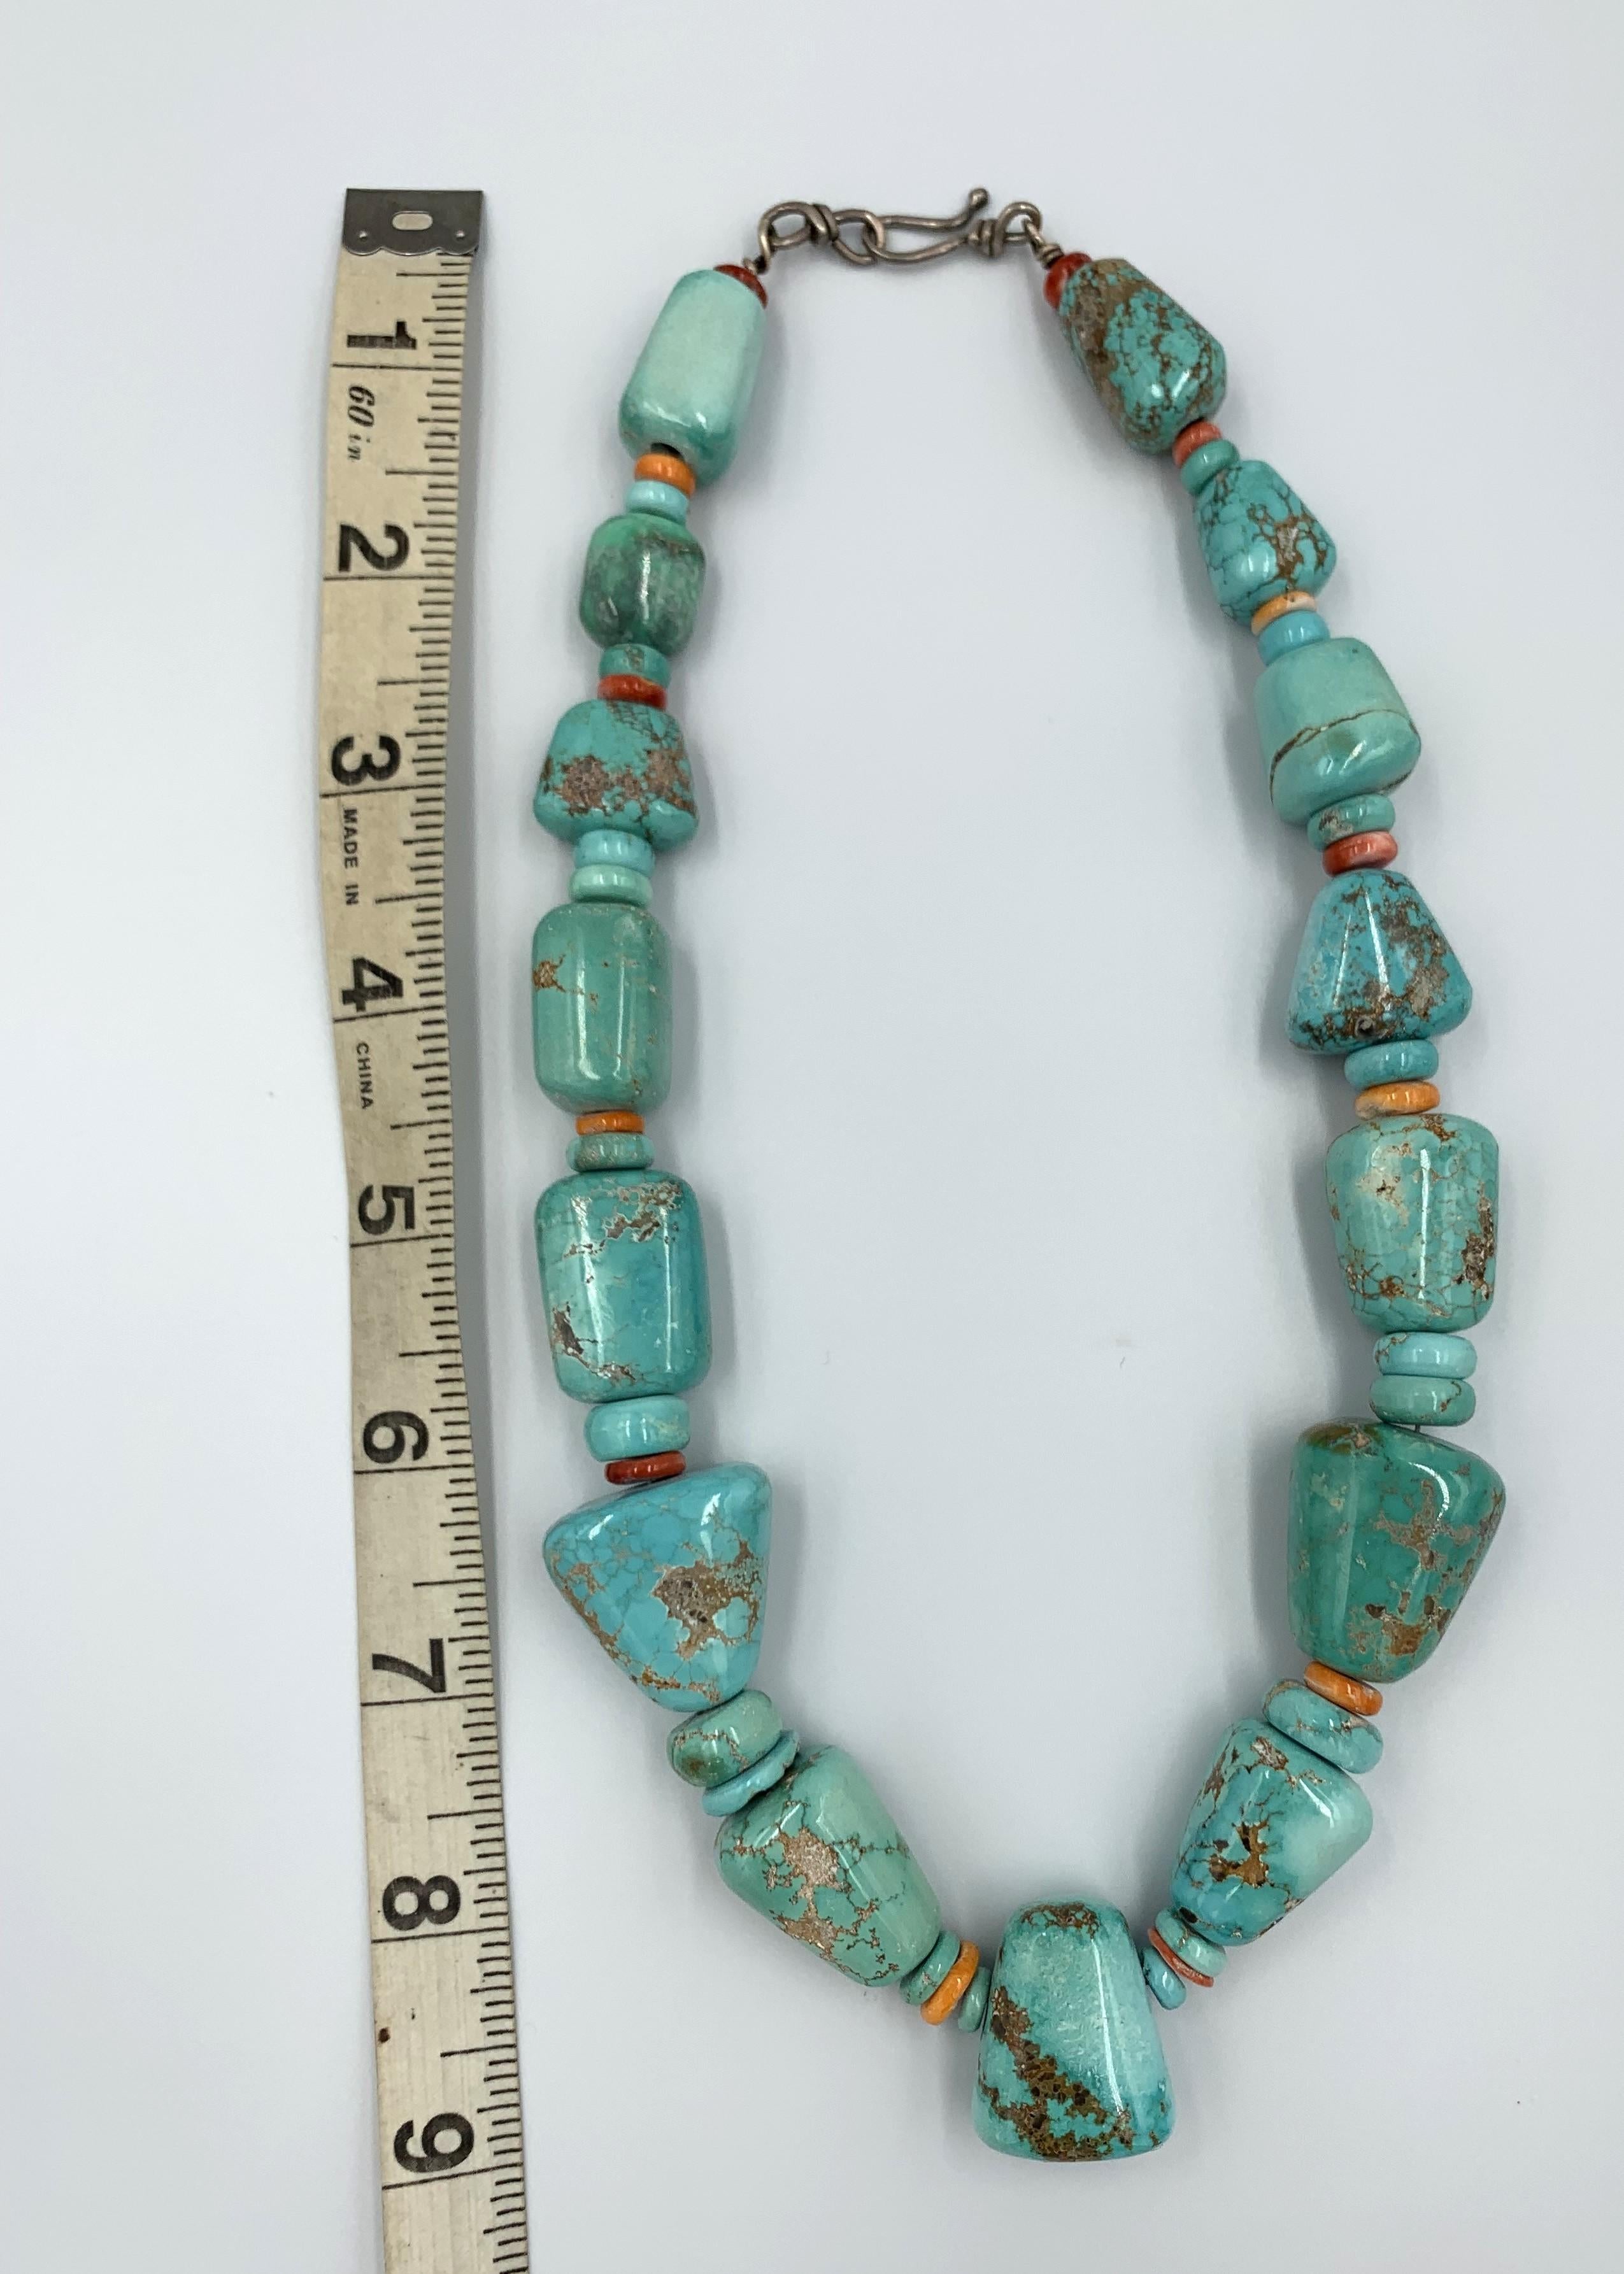 Carico Lake Turquoise Bead Necklace by Bruce Eckhardt For Sale 4